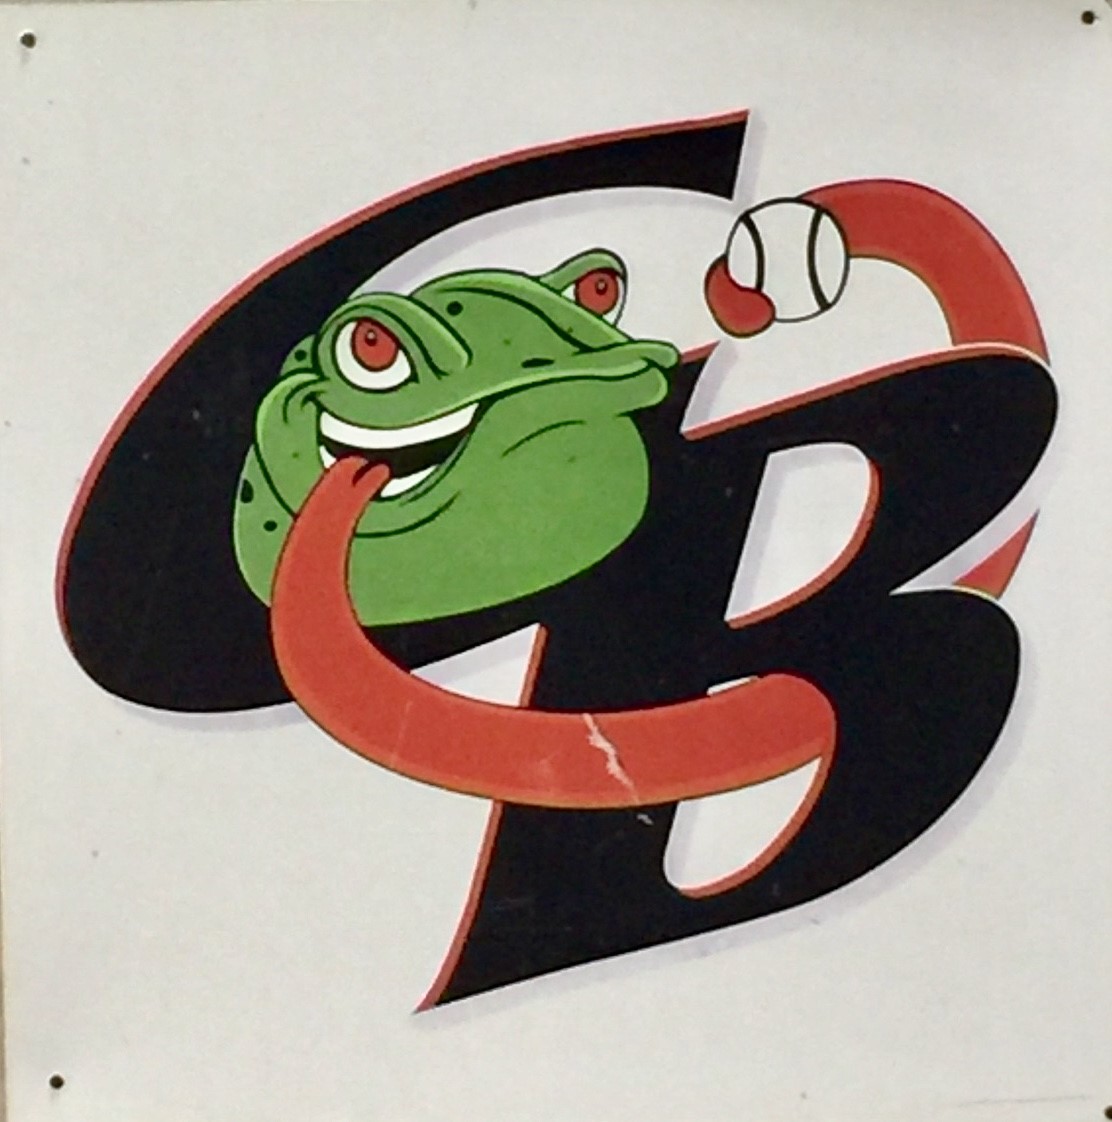 One bad inning costs ‘Frogs